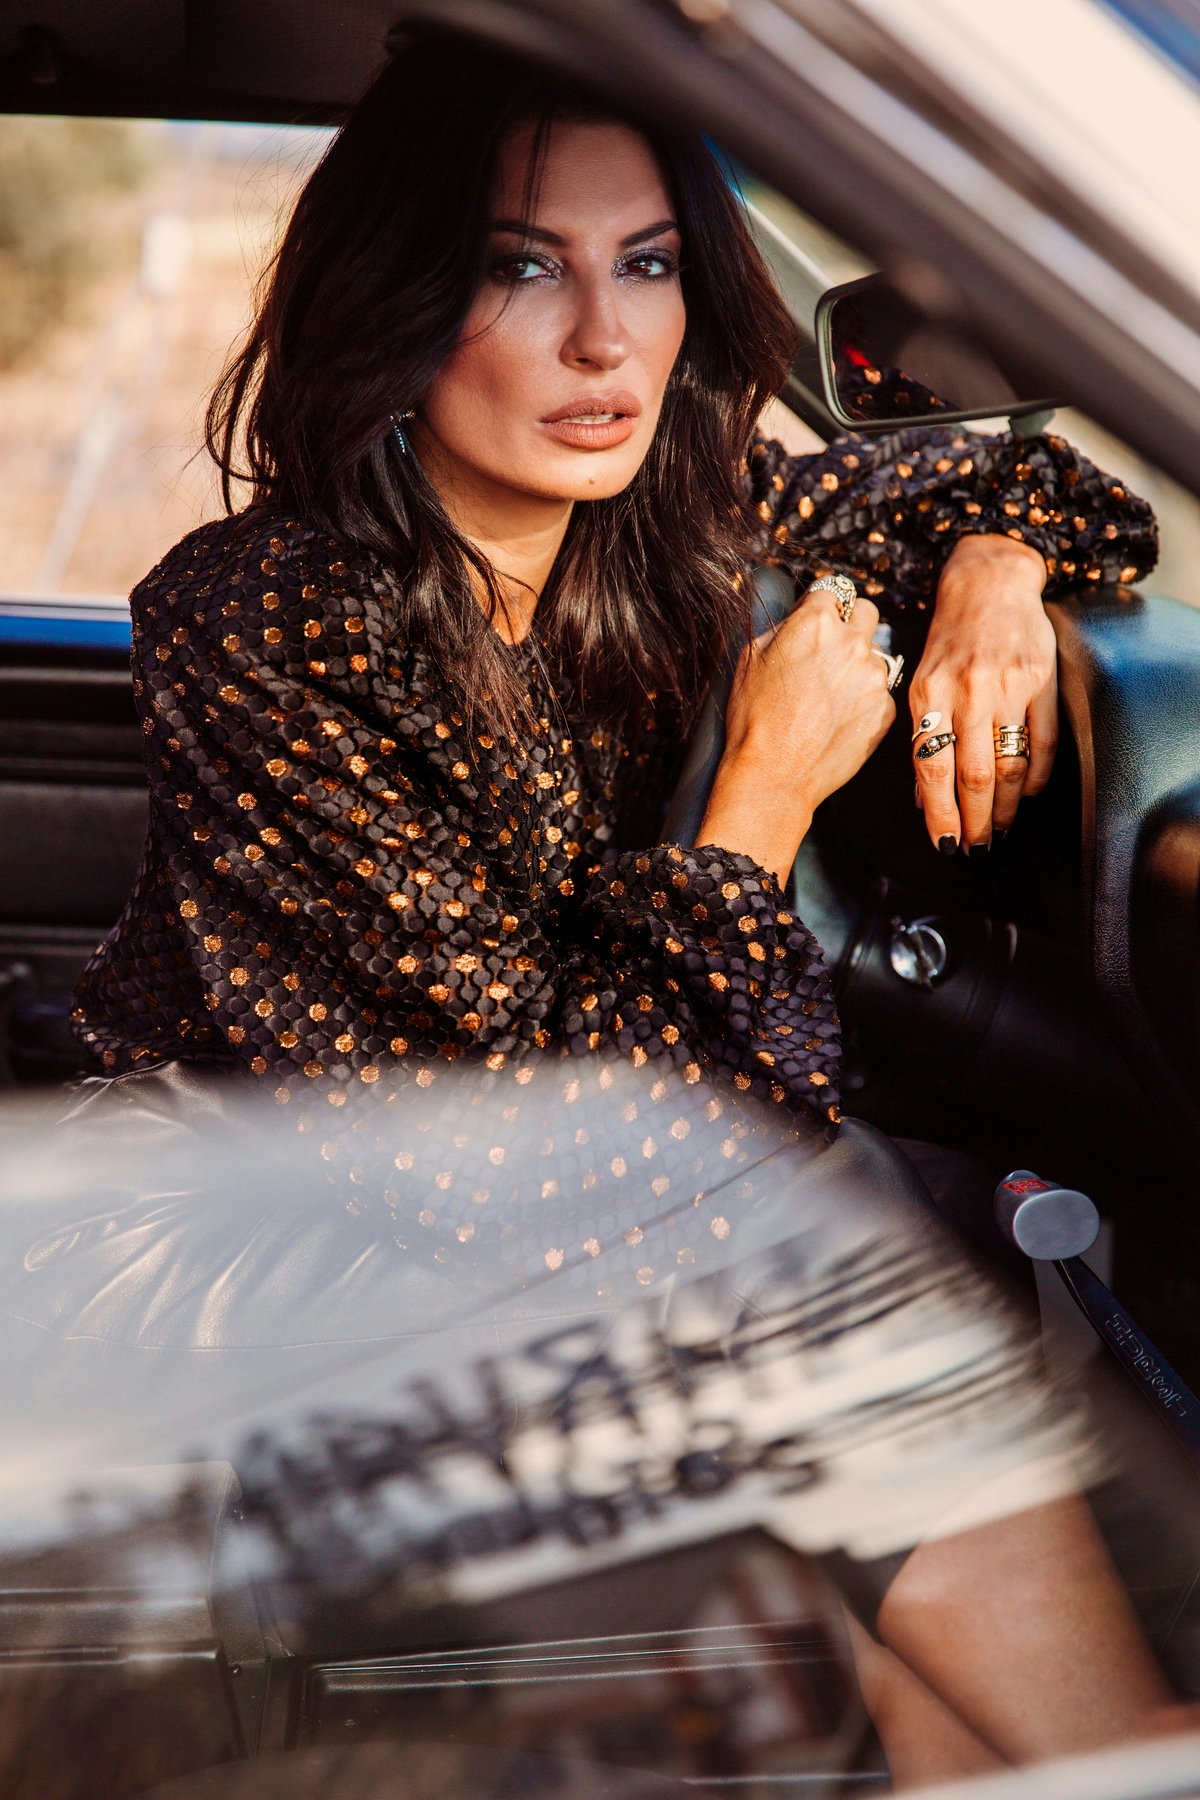 Woman leaning in her car, wearing a black top with gold rings on her fingers